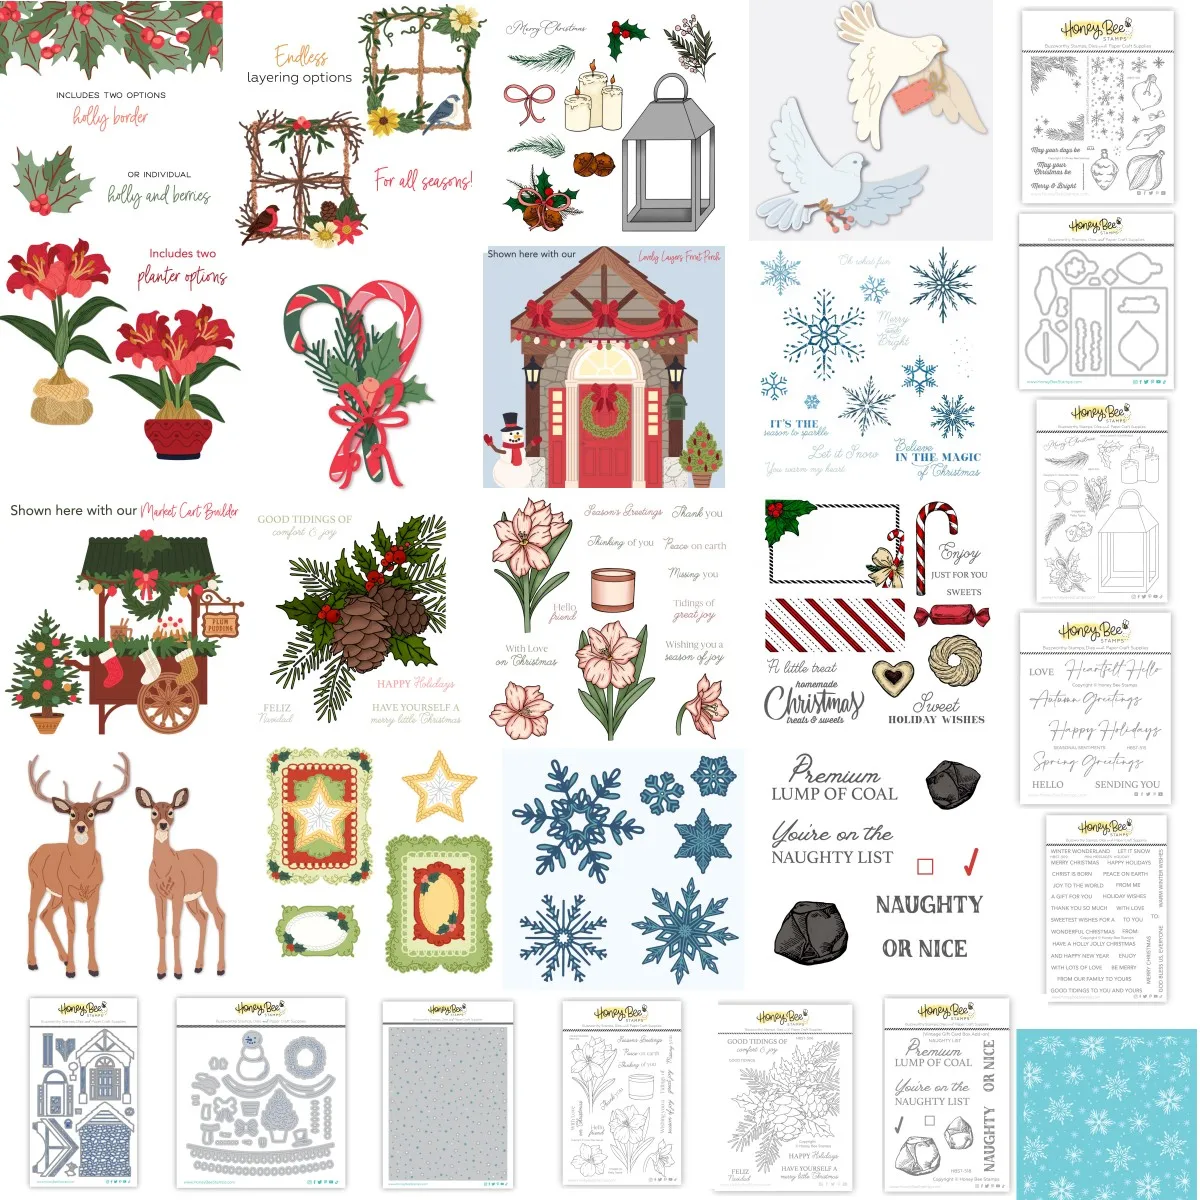 

2023 Christmas Holiday Wishes New Metal Cutting Dies Clear Stamps Stencil Sets For Diy Craft Making Greeting Card Scrapbook